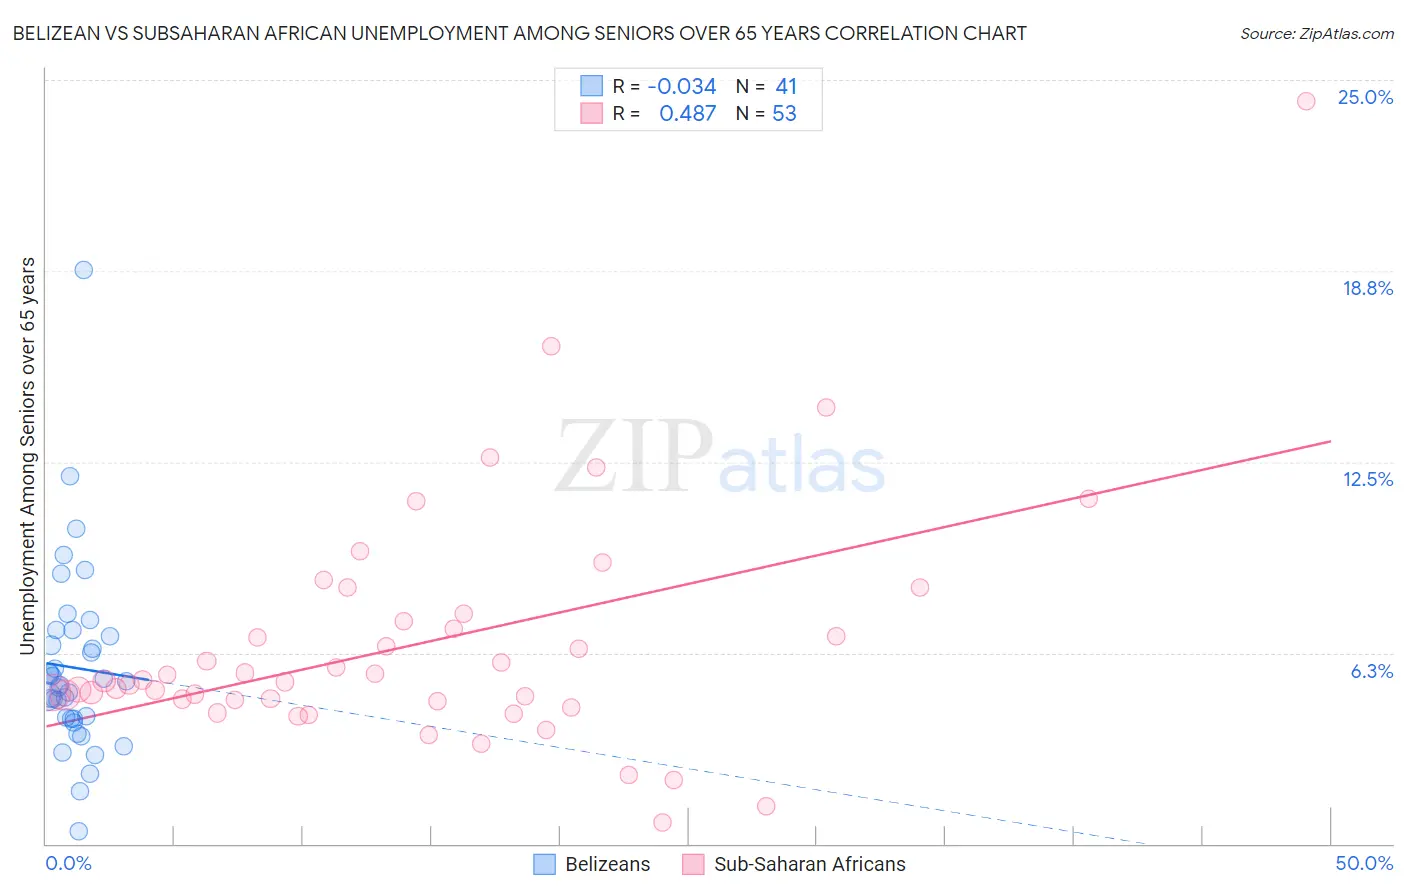 Belizean vs Subsaharan African Unemployment Among Seniors over 65 years